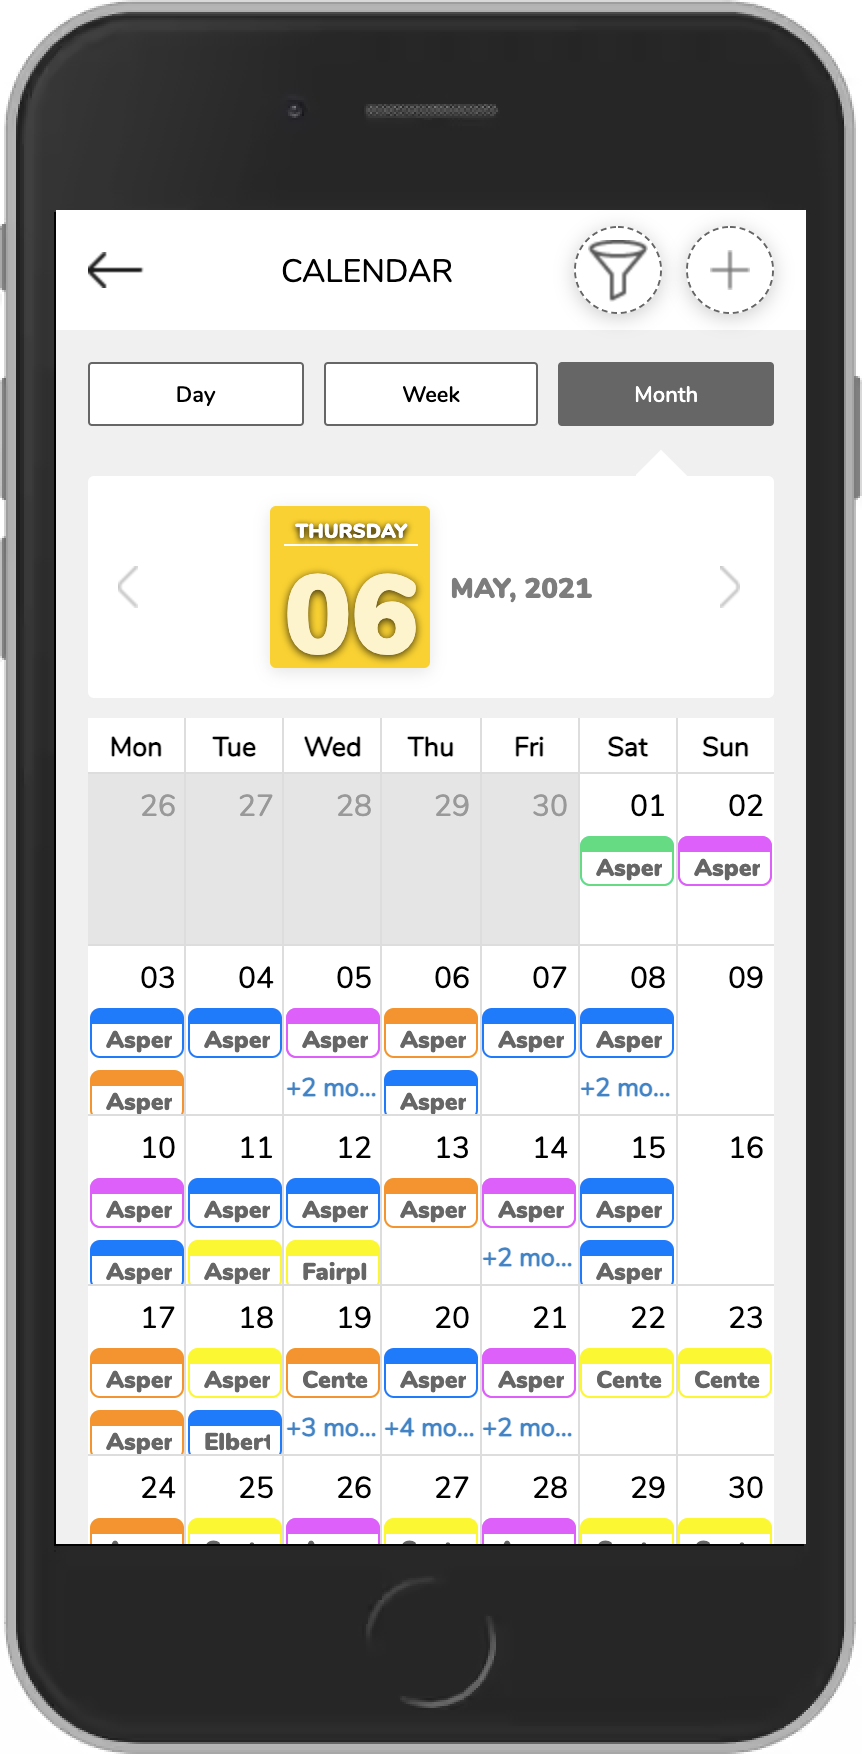 Colour-coding provides a comprehensive overview of each horse's Activities. View by month, week, or day, and Filter by horse, Activity Type, and Sub-Activity Type